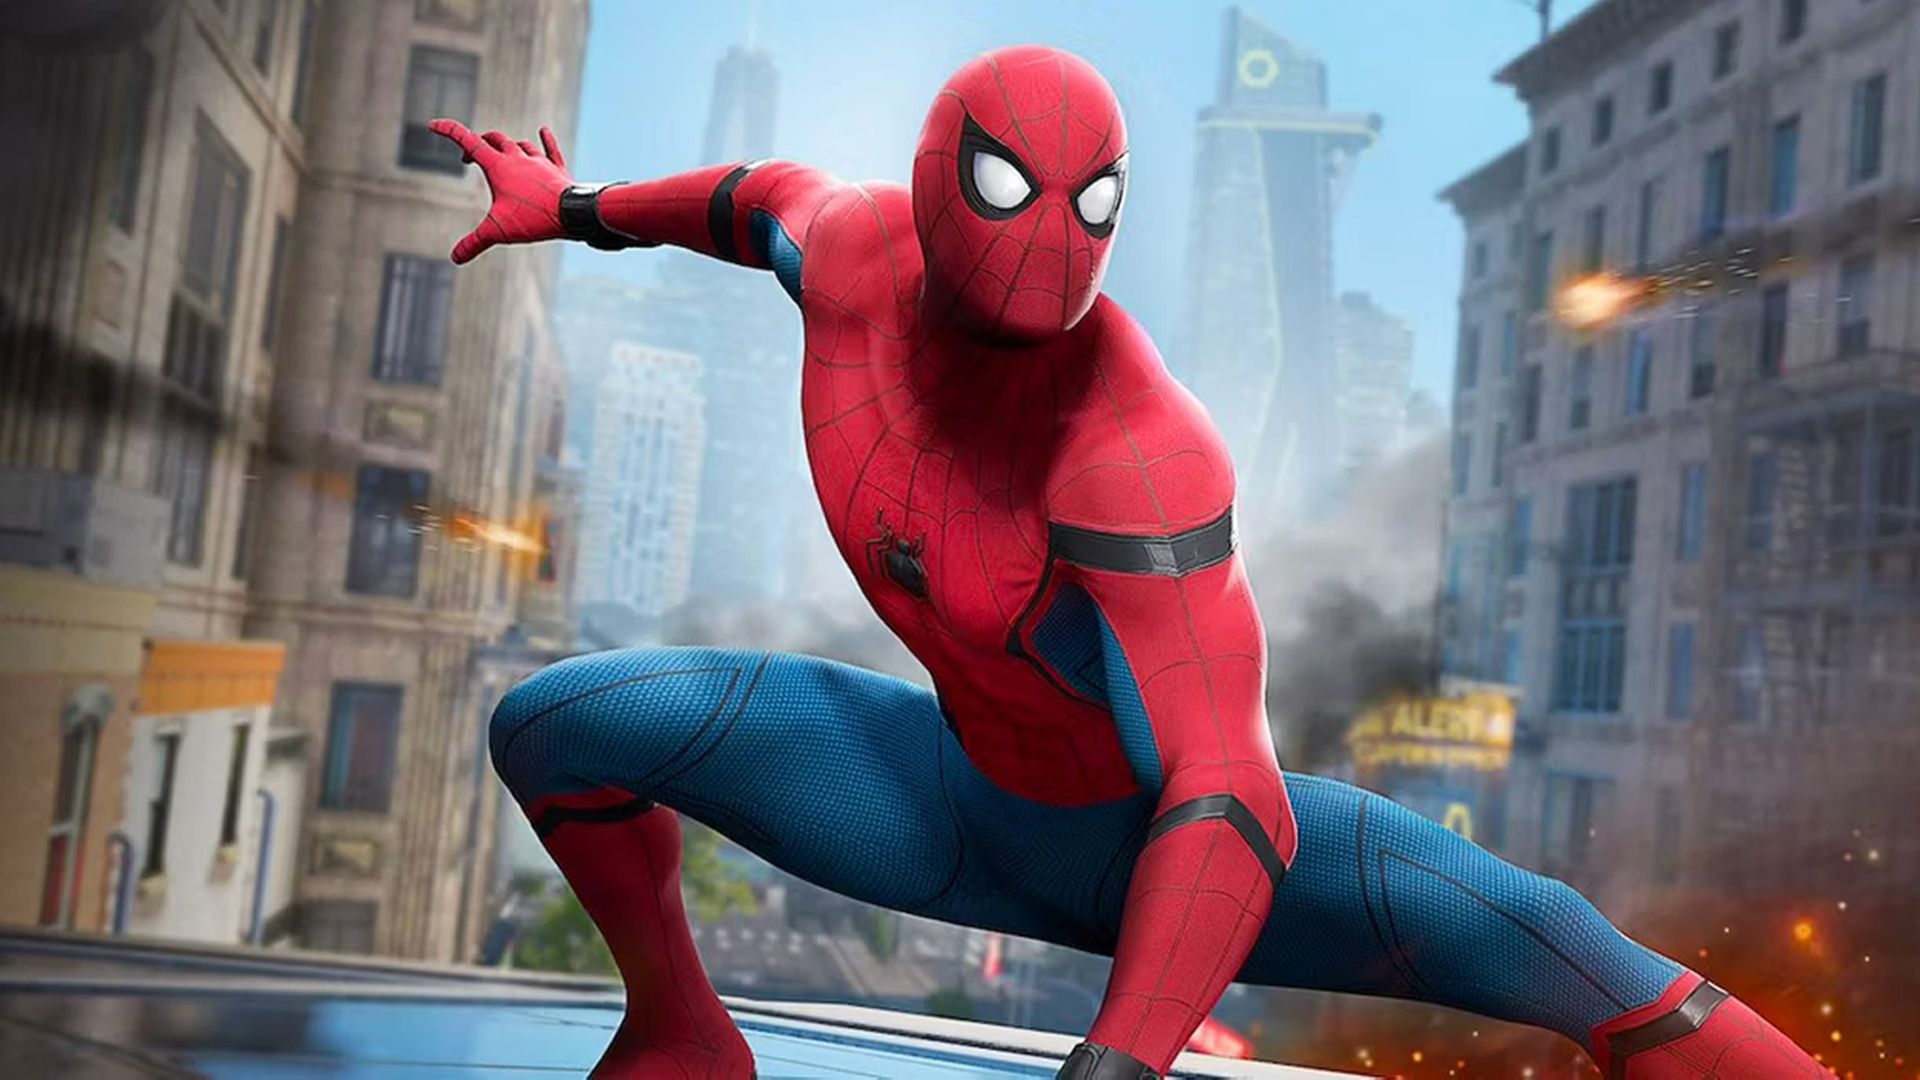 RUMOR- Spider-Man 4 to See Peter Parker 'Take a Back Seat'